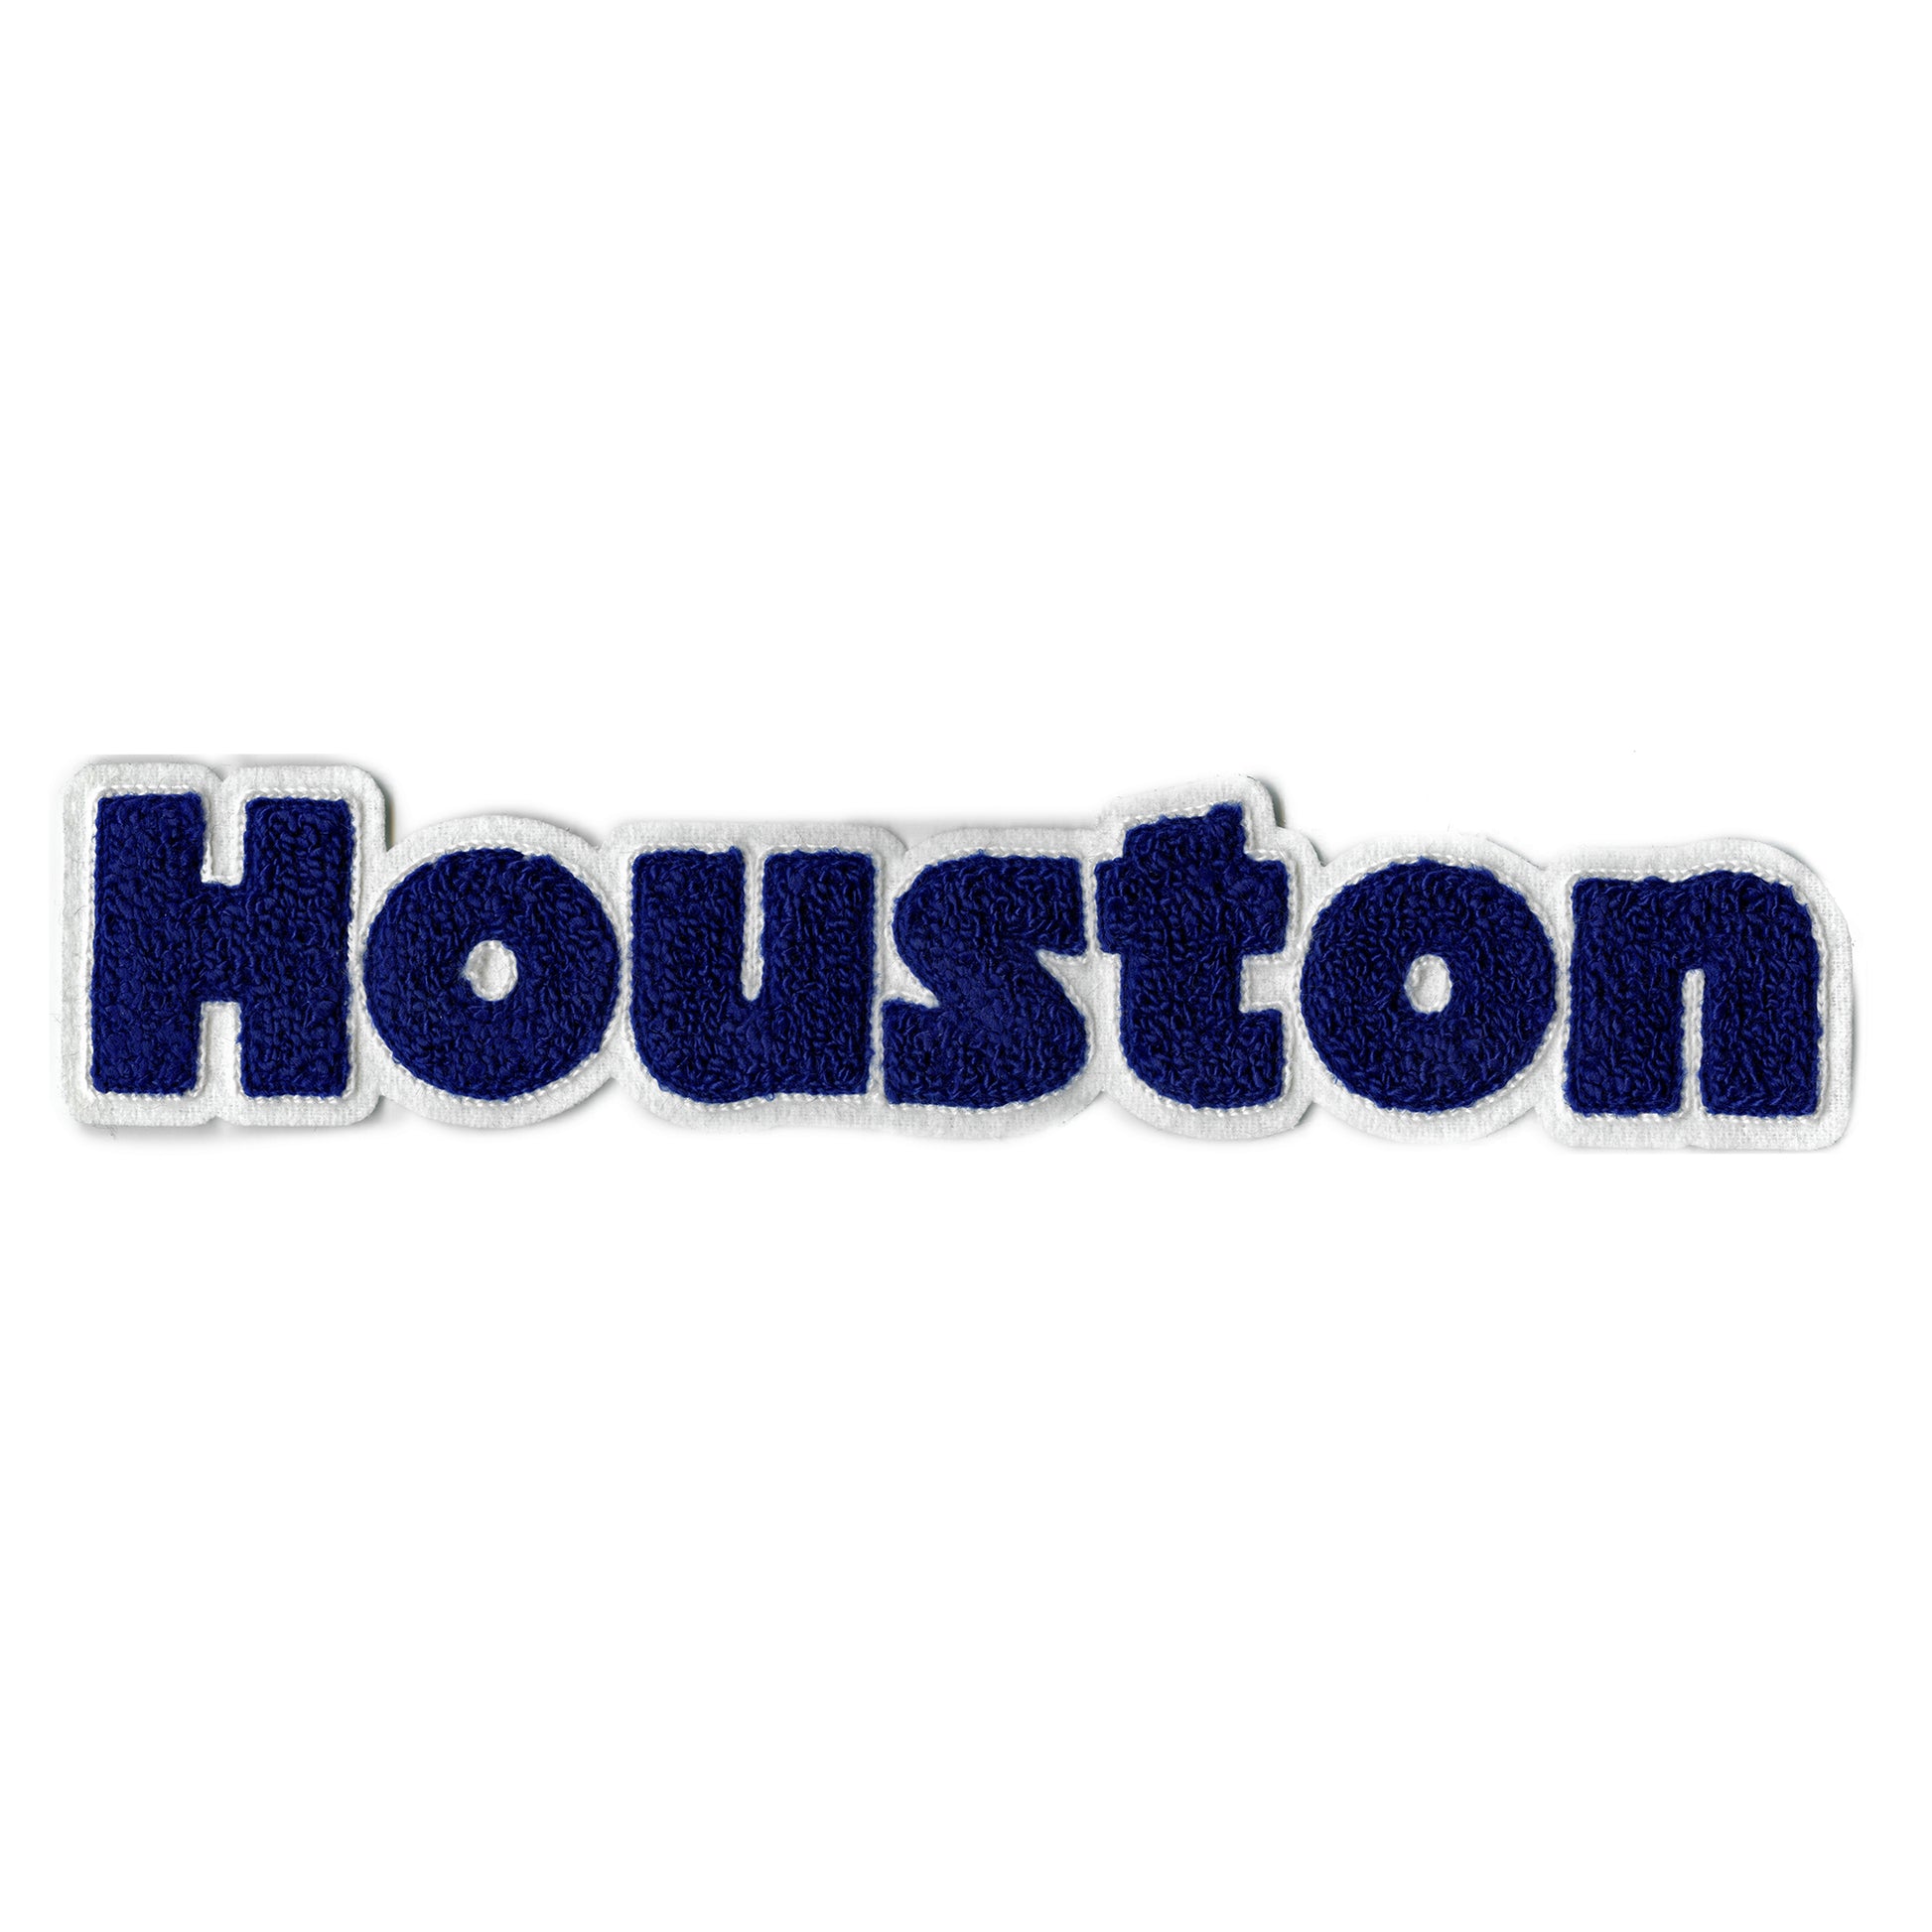 Houston Texas Patch Chenille Fabric Sew On 